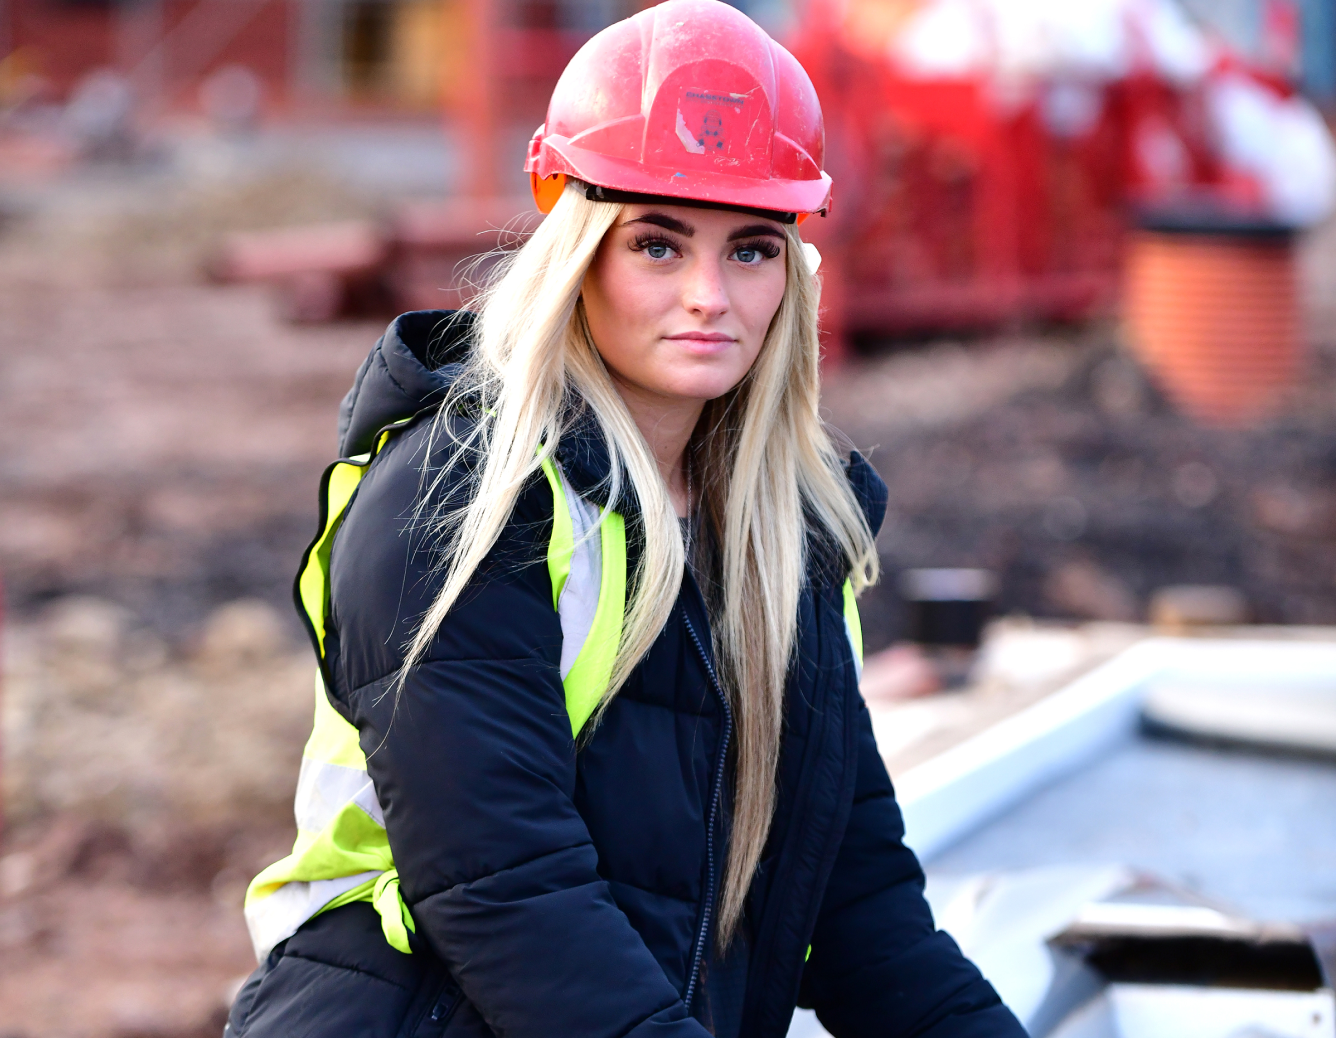 A person wearing a hard hat